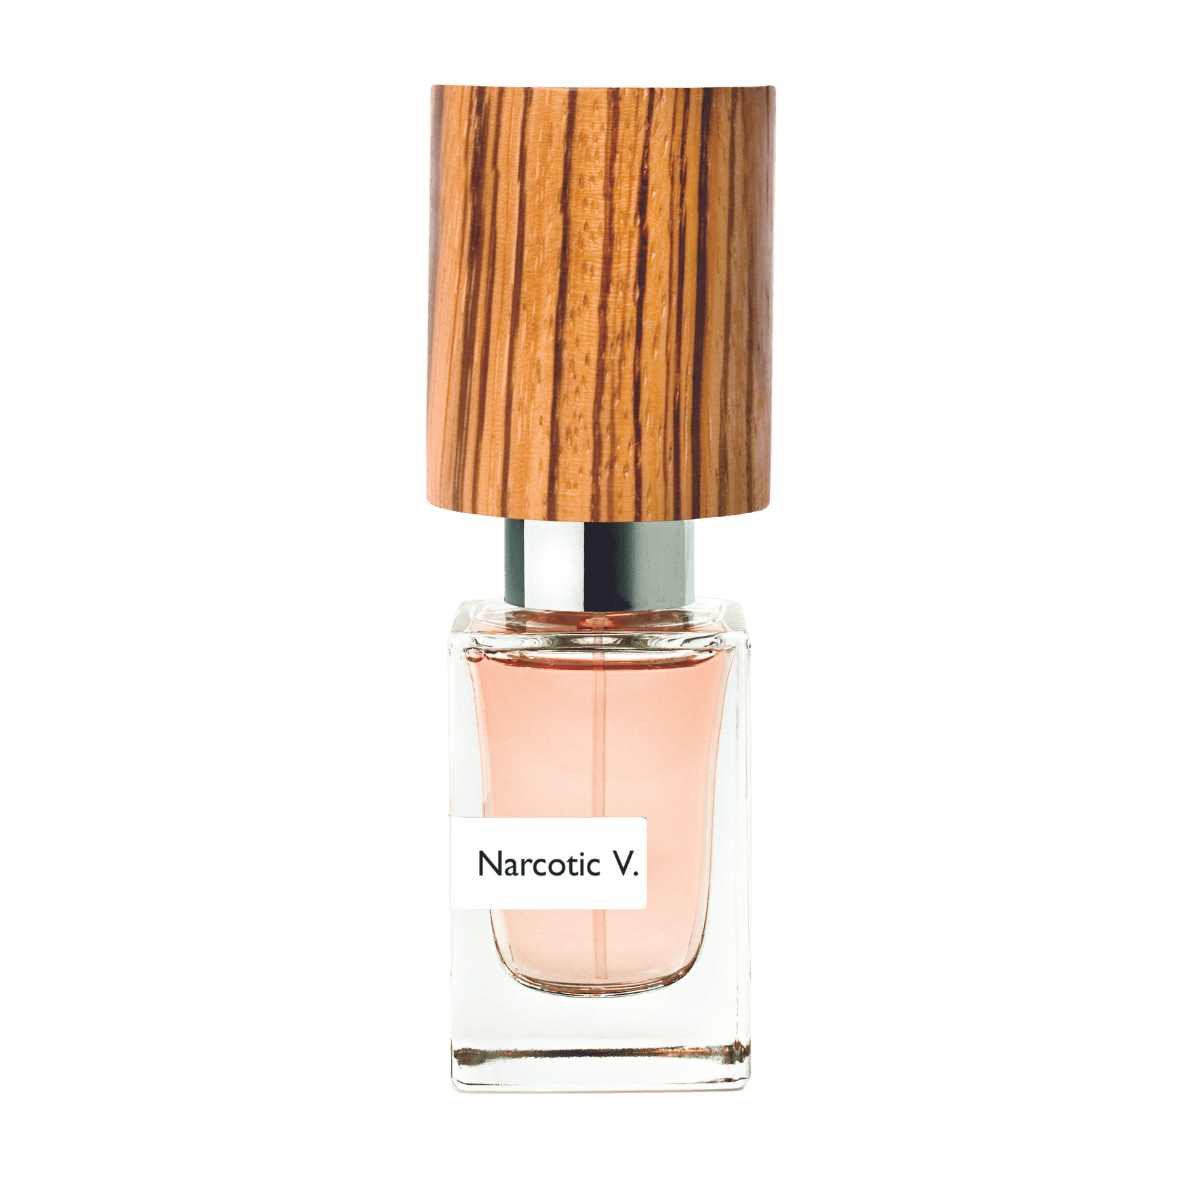 Image of Narcotic V. extrait de parfum 30 ml by the perfume brand Nasomatto